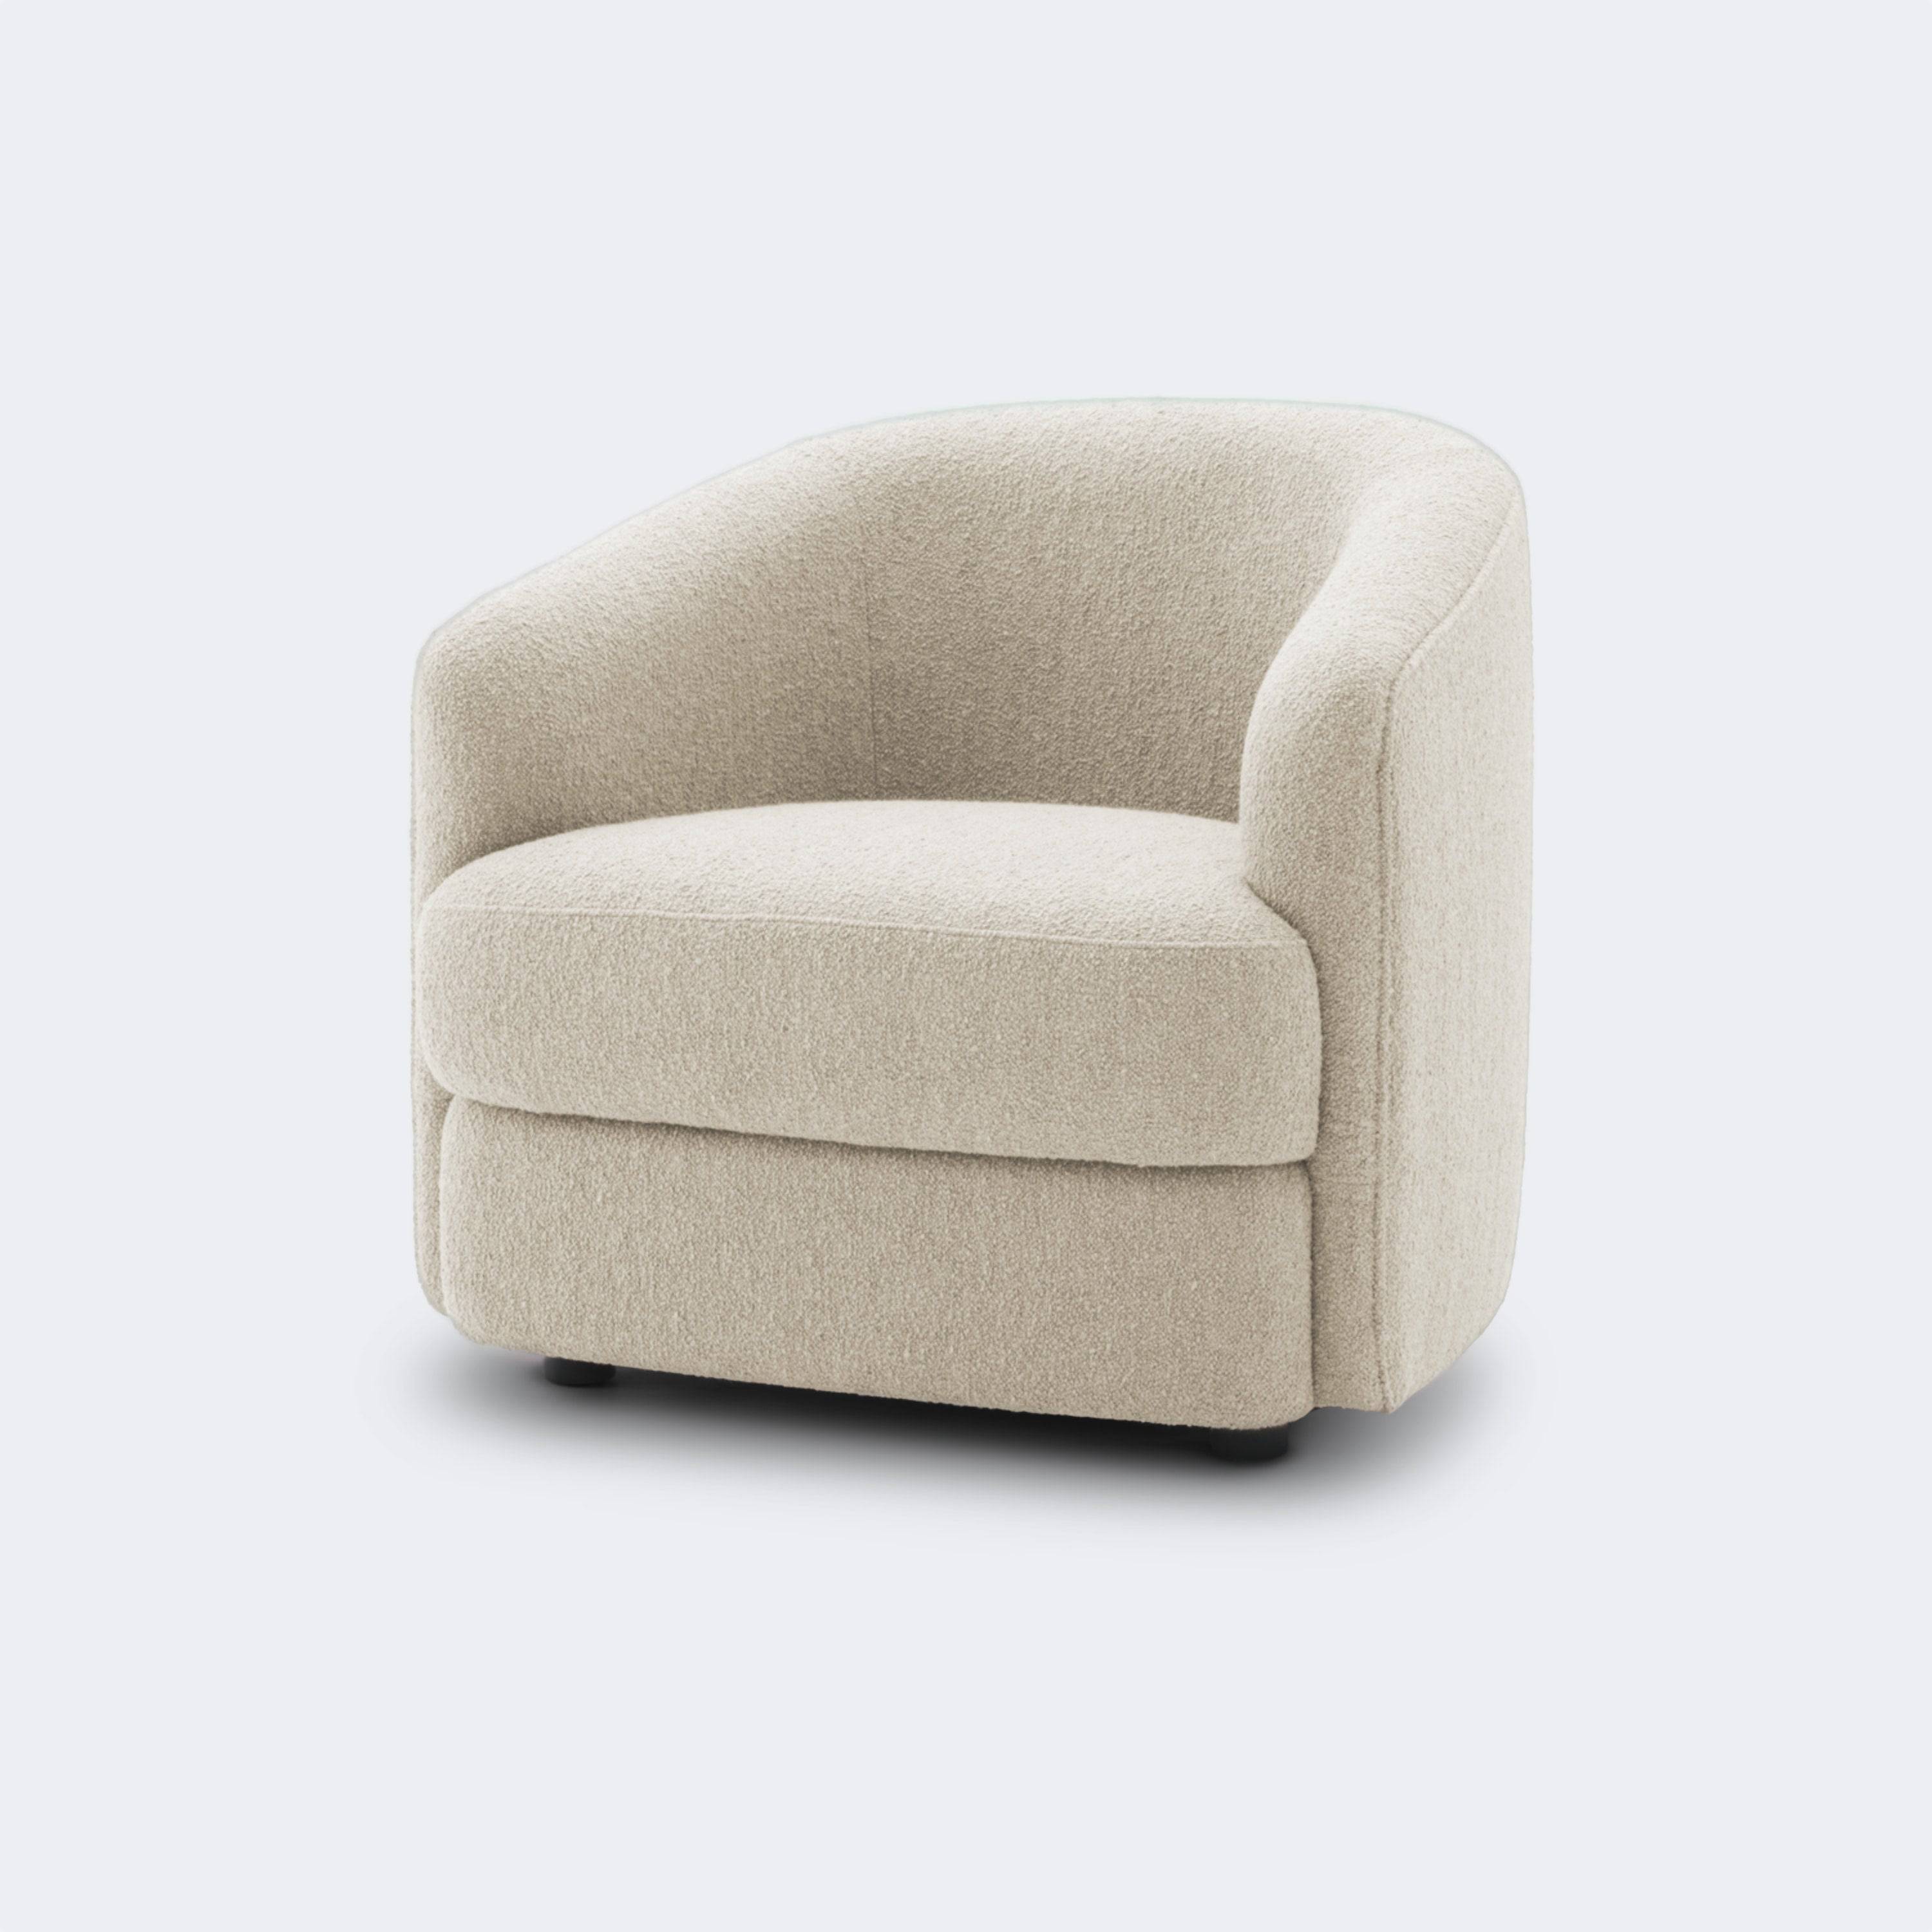 New Works Covent Lounge Chair Lana - KANSO#Upholstery_Lana